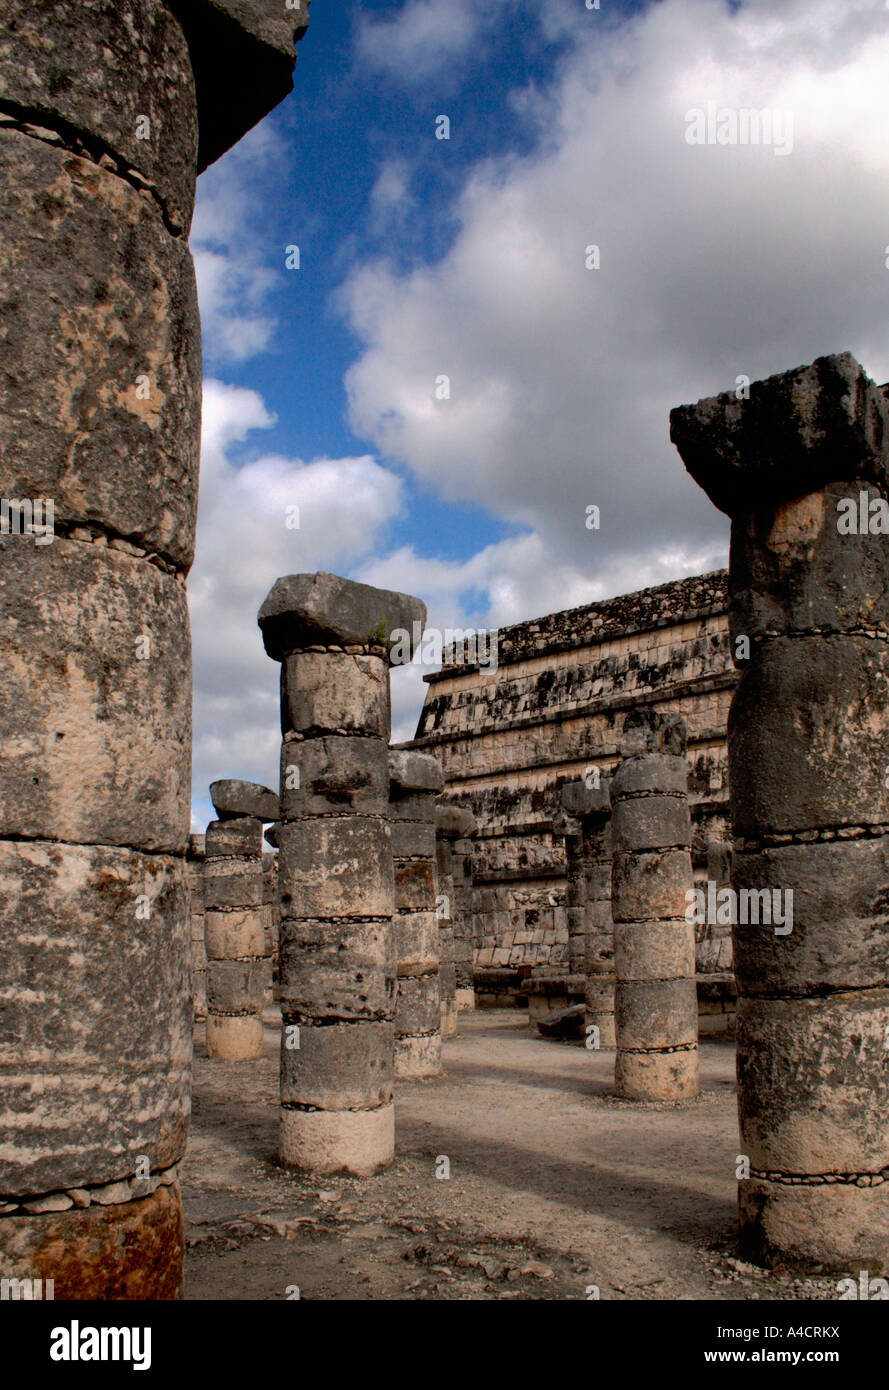 Chichen Itza, Mayan Archaeological ruin site in North Central Yucatan shows Toltec influence from Central Mexico Stock Photo